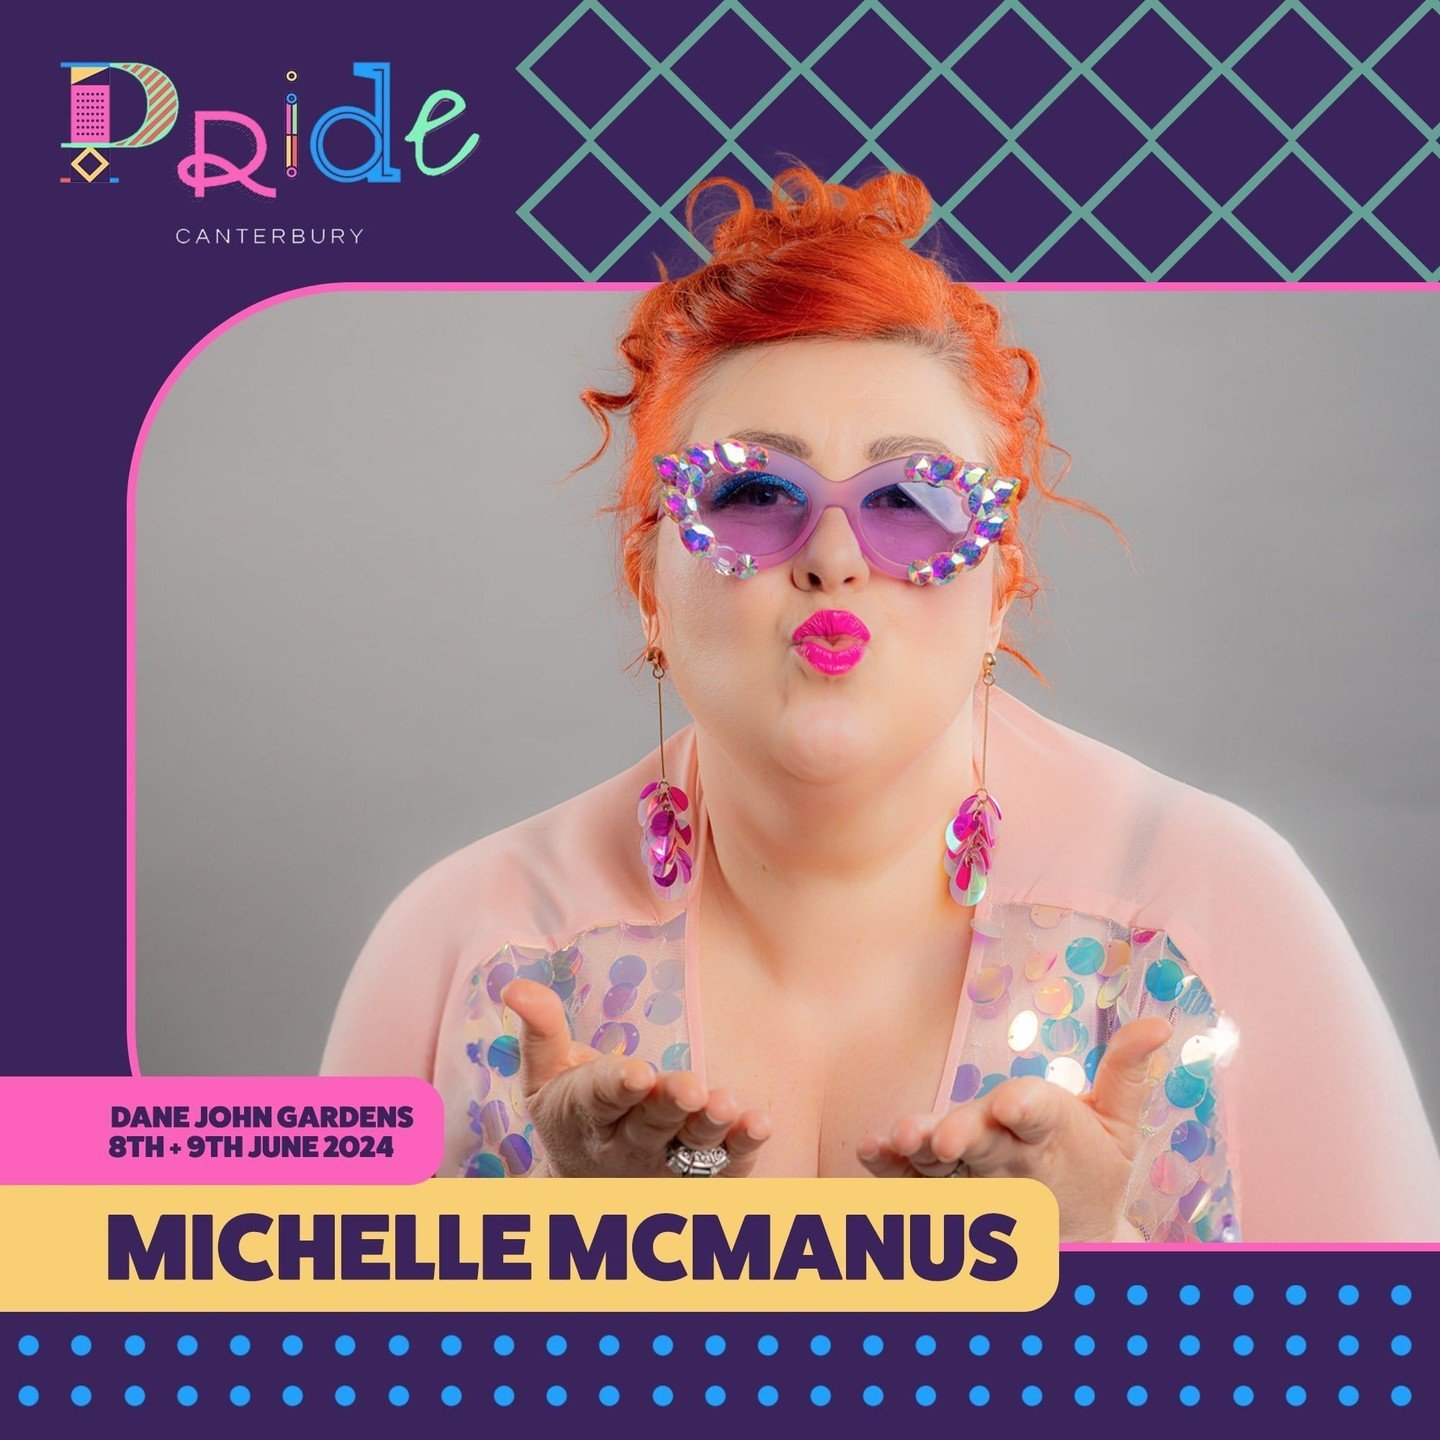 📣 Pride Canterbury 2024 line-up Announcement 

@LadyM_Mcmanus
She is a Pop Idol winner and all round icon. After all this time, she will be on our main stage! 

More coming soon 👀